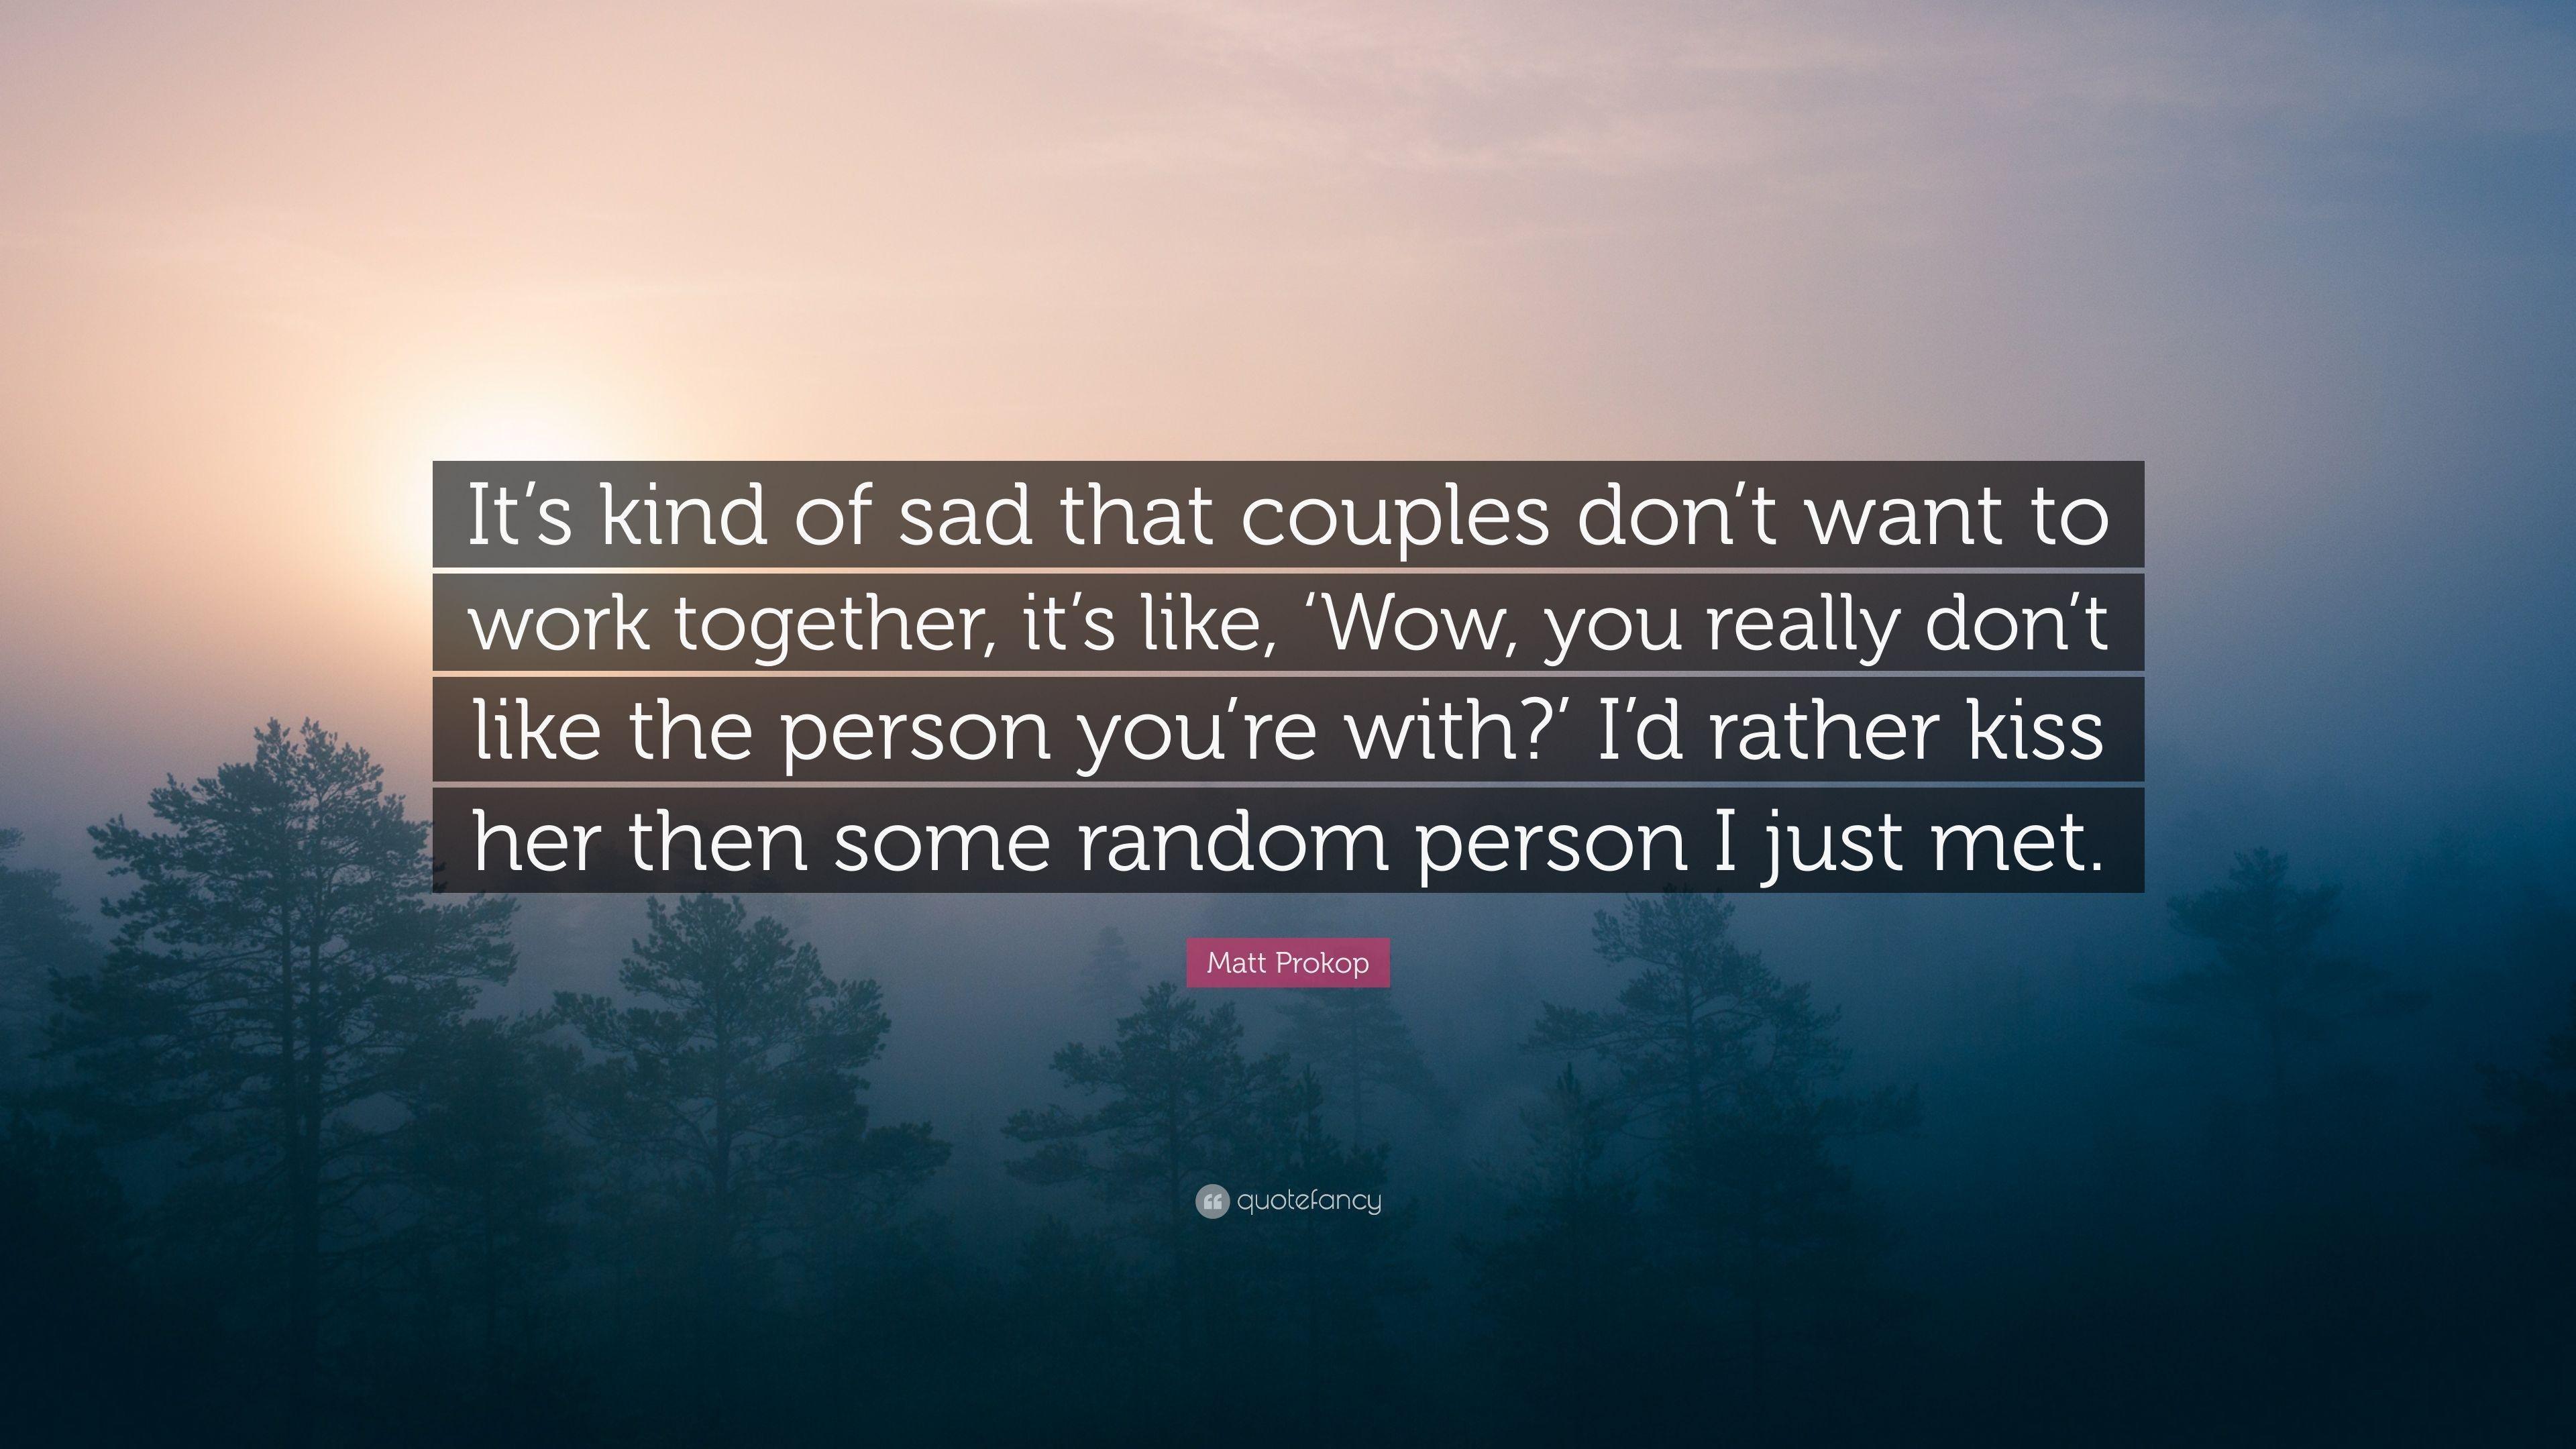 Matt Prokop Quote: “It's kind of sad that couples don't want to work